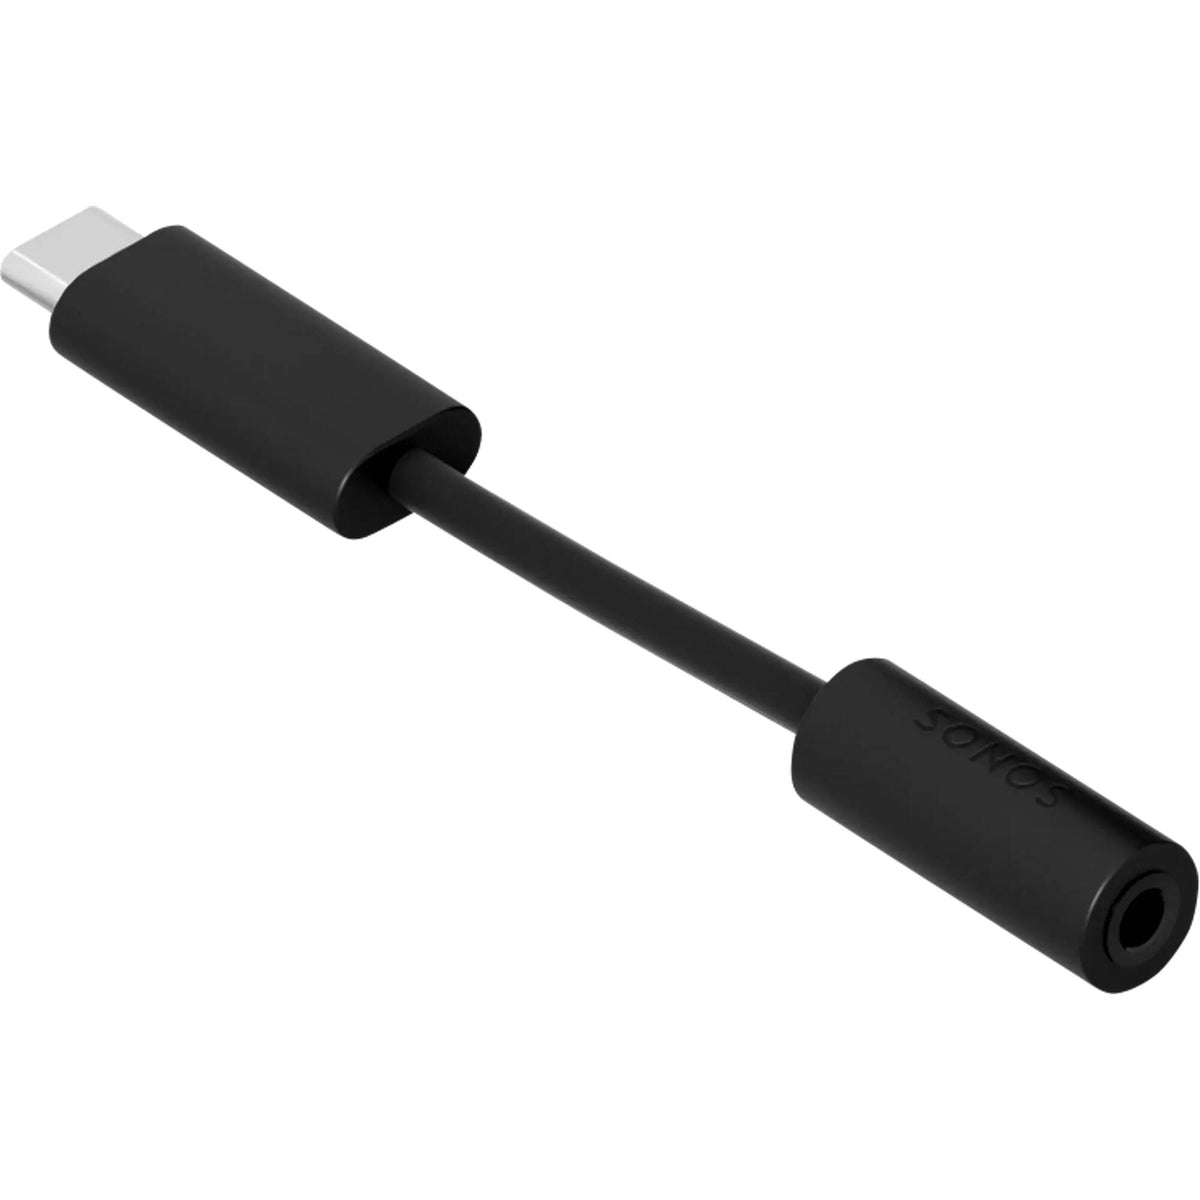 Sonos Line In Dongle